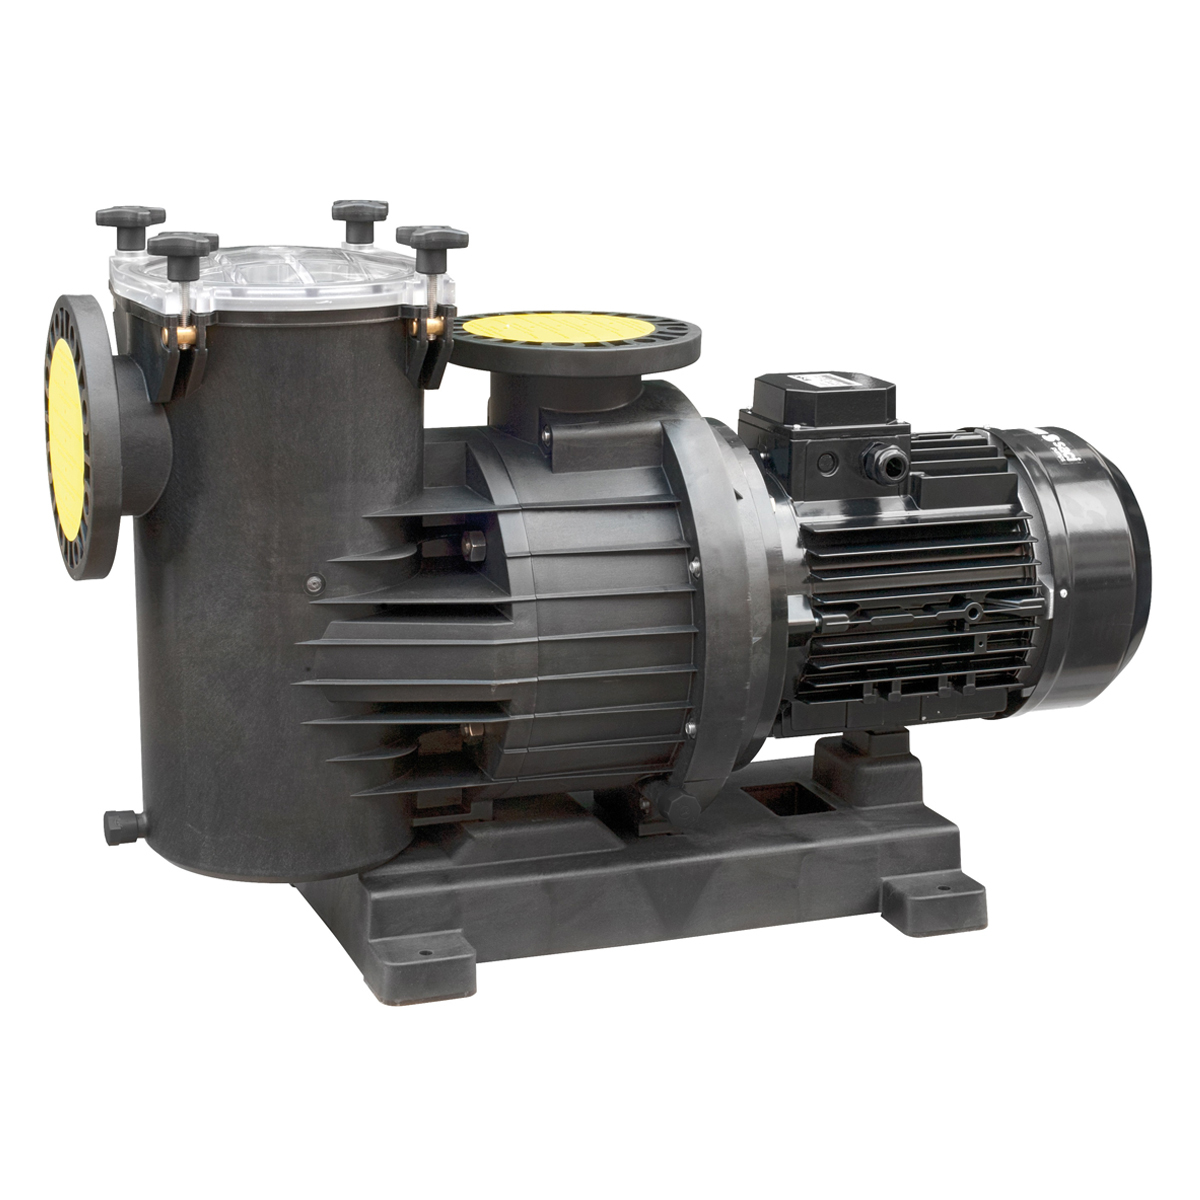 Smart Power Filter Pump 1000 400-690V, 1450 rpm 7,5 kW, 10 HP, 126 m3/h at 10m Smart Power Filter Pump 1000 400-690V, 1450 rpm 7,5 kW, 10 HP, 126 m3/h at 10m